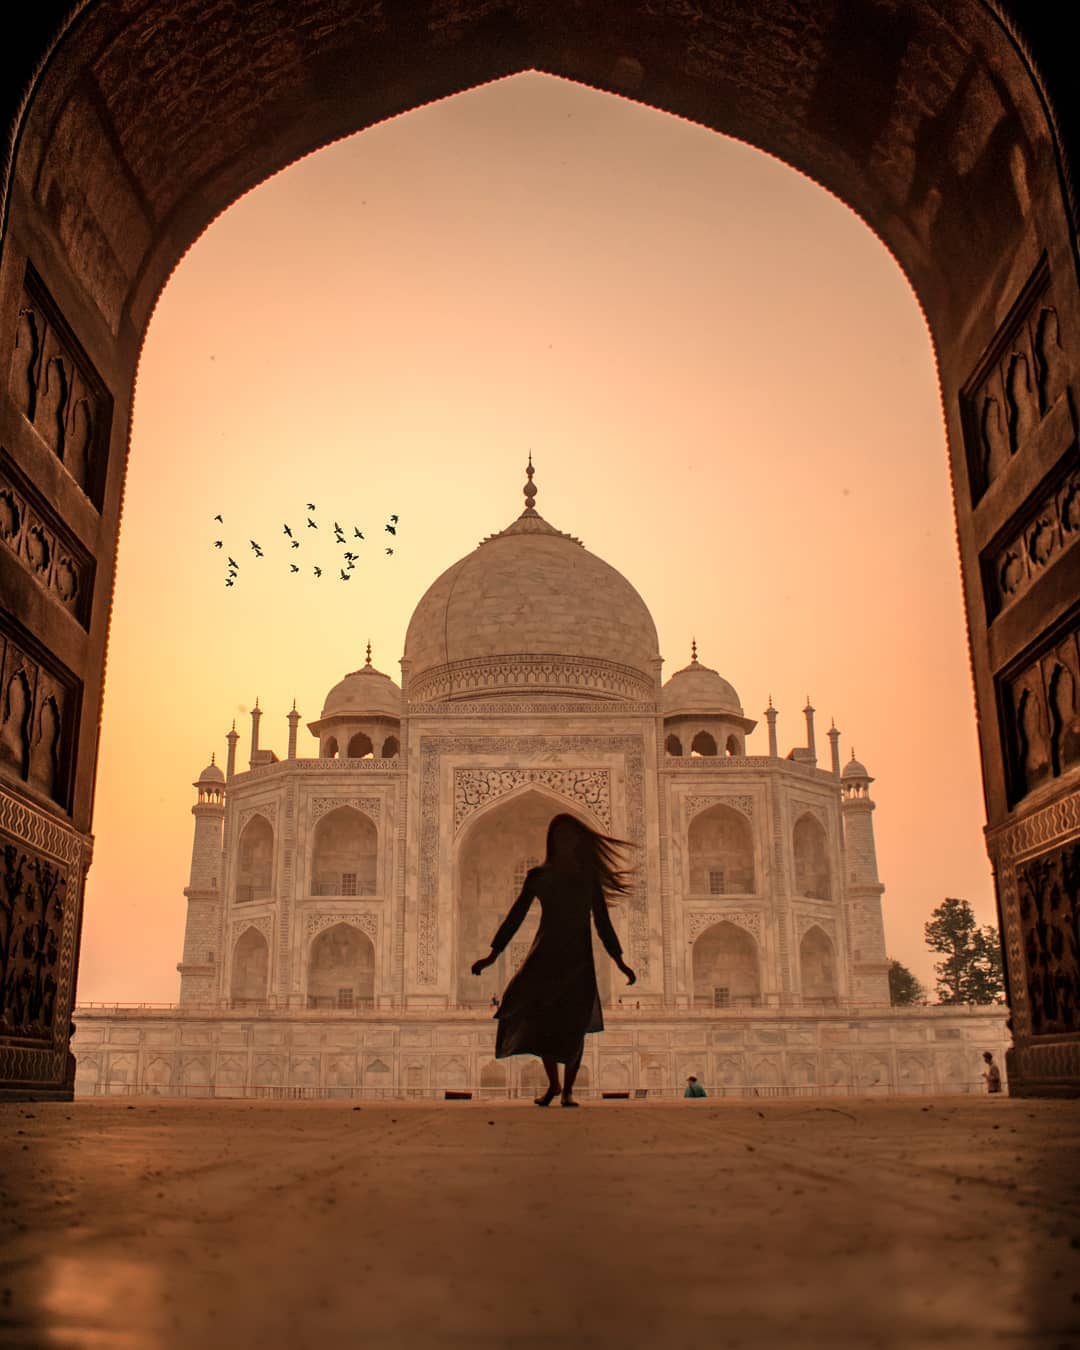 12 Places To Visit In Agra, The City Full Of Architectural Marvels